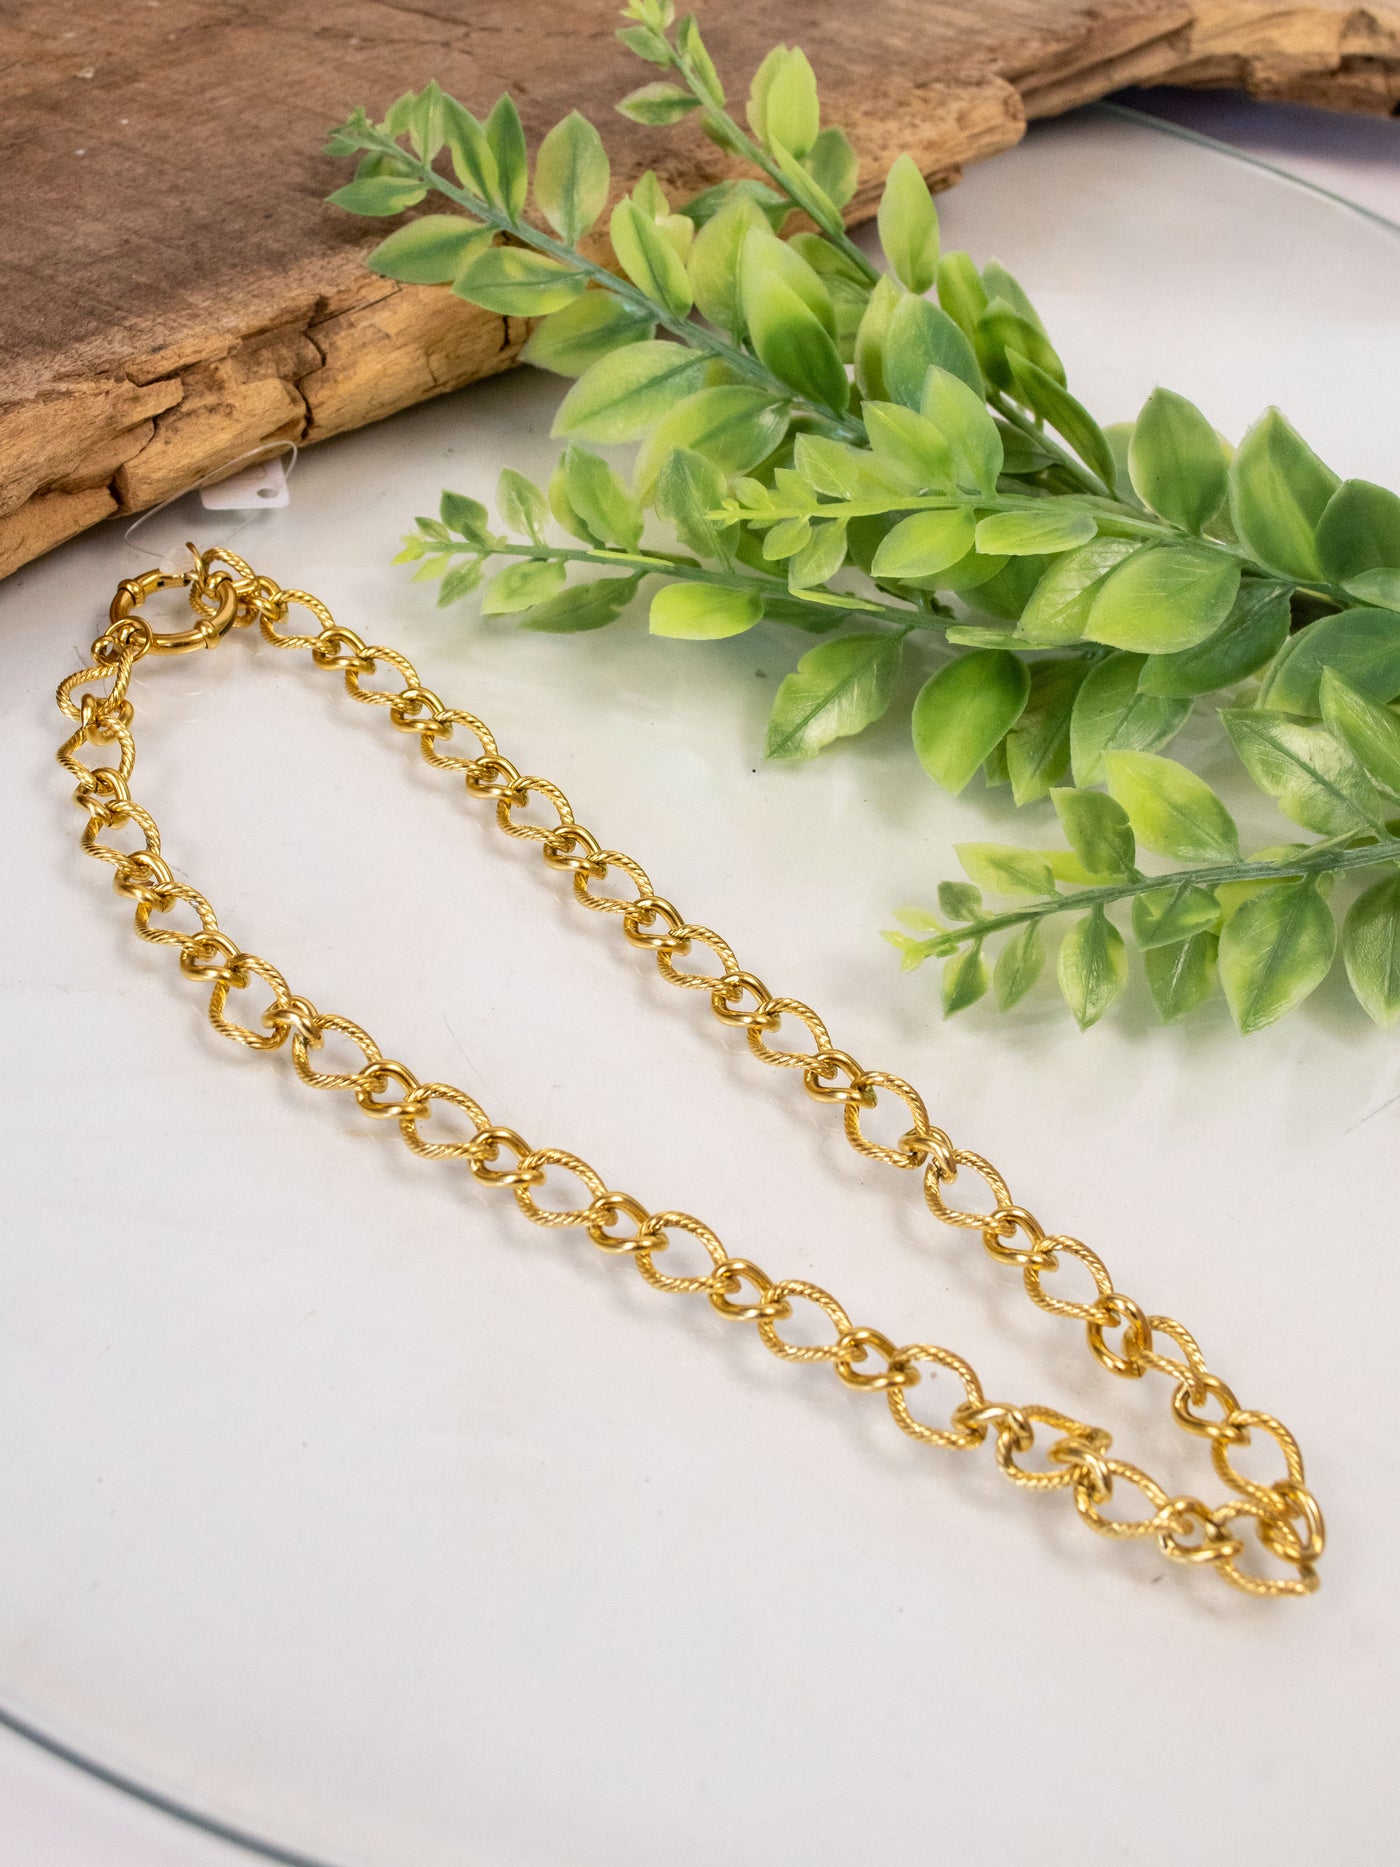 A gold plated chain link necklace with a large clasp. It is 16 inches.